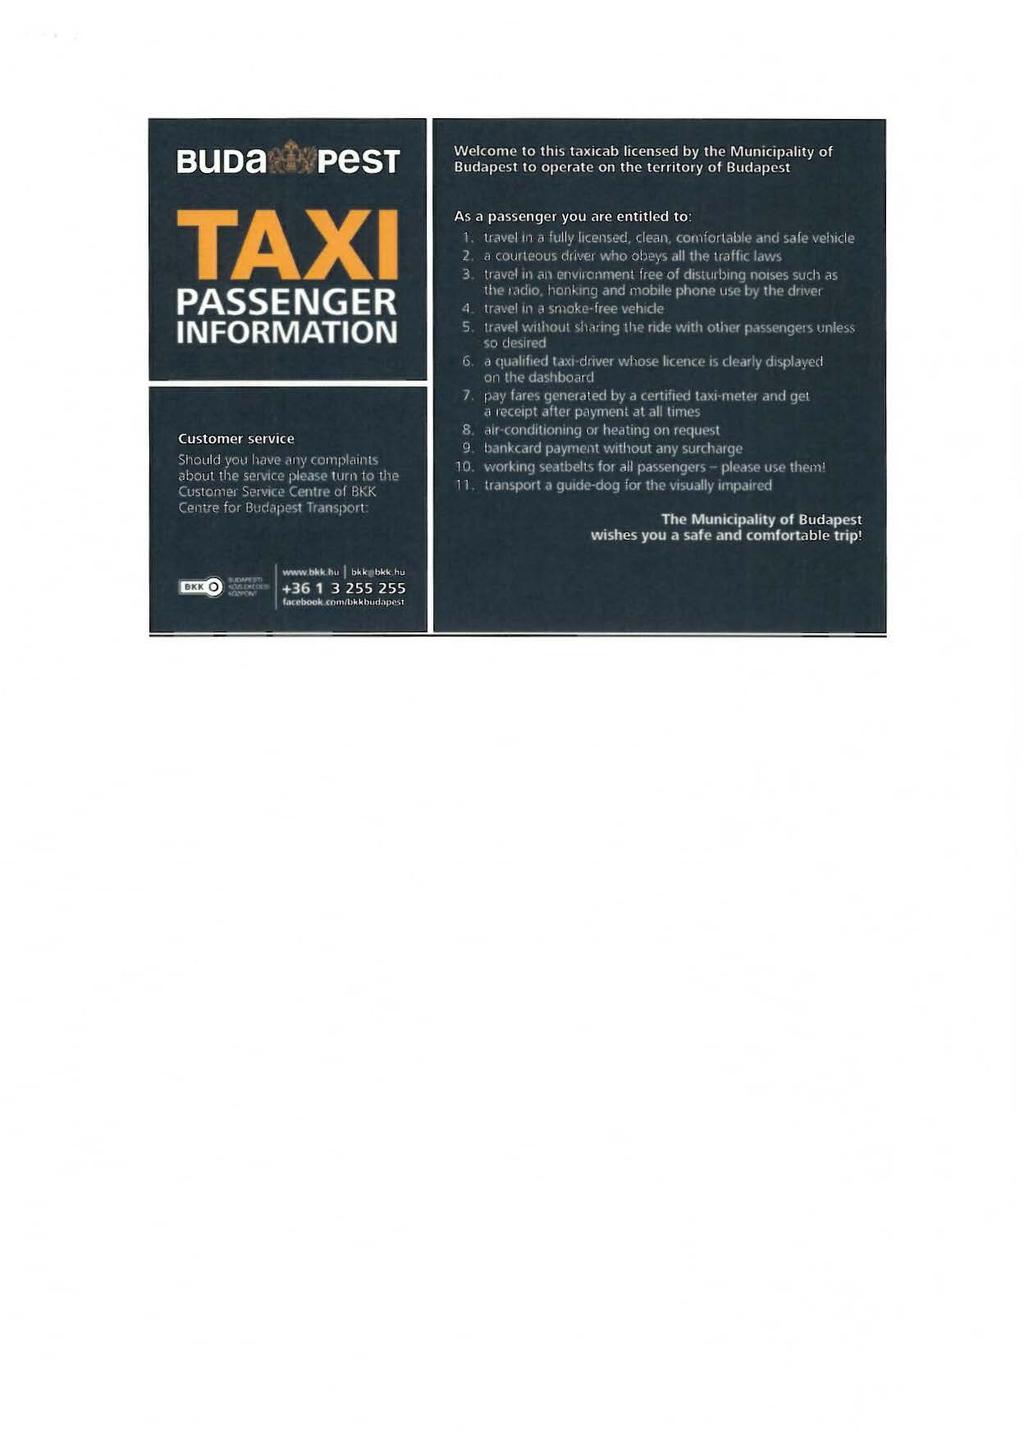 BUDa PeST Welcome to this taxicab lícensed by the Municipalíty of Budapest to operate on the territory of Budapest TAXI PASSENGE R INFORMATION Customer service 1 Should y~~u 1.tVl'.